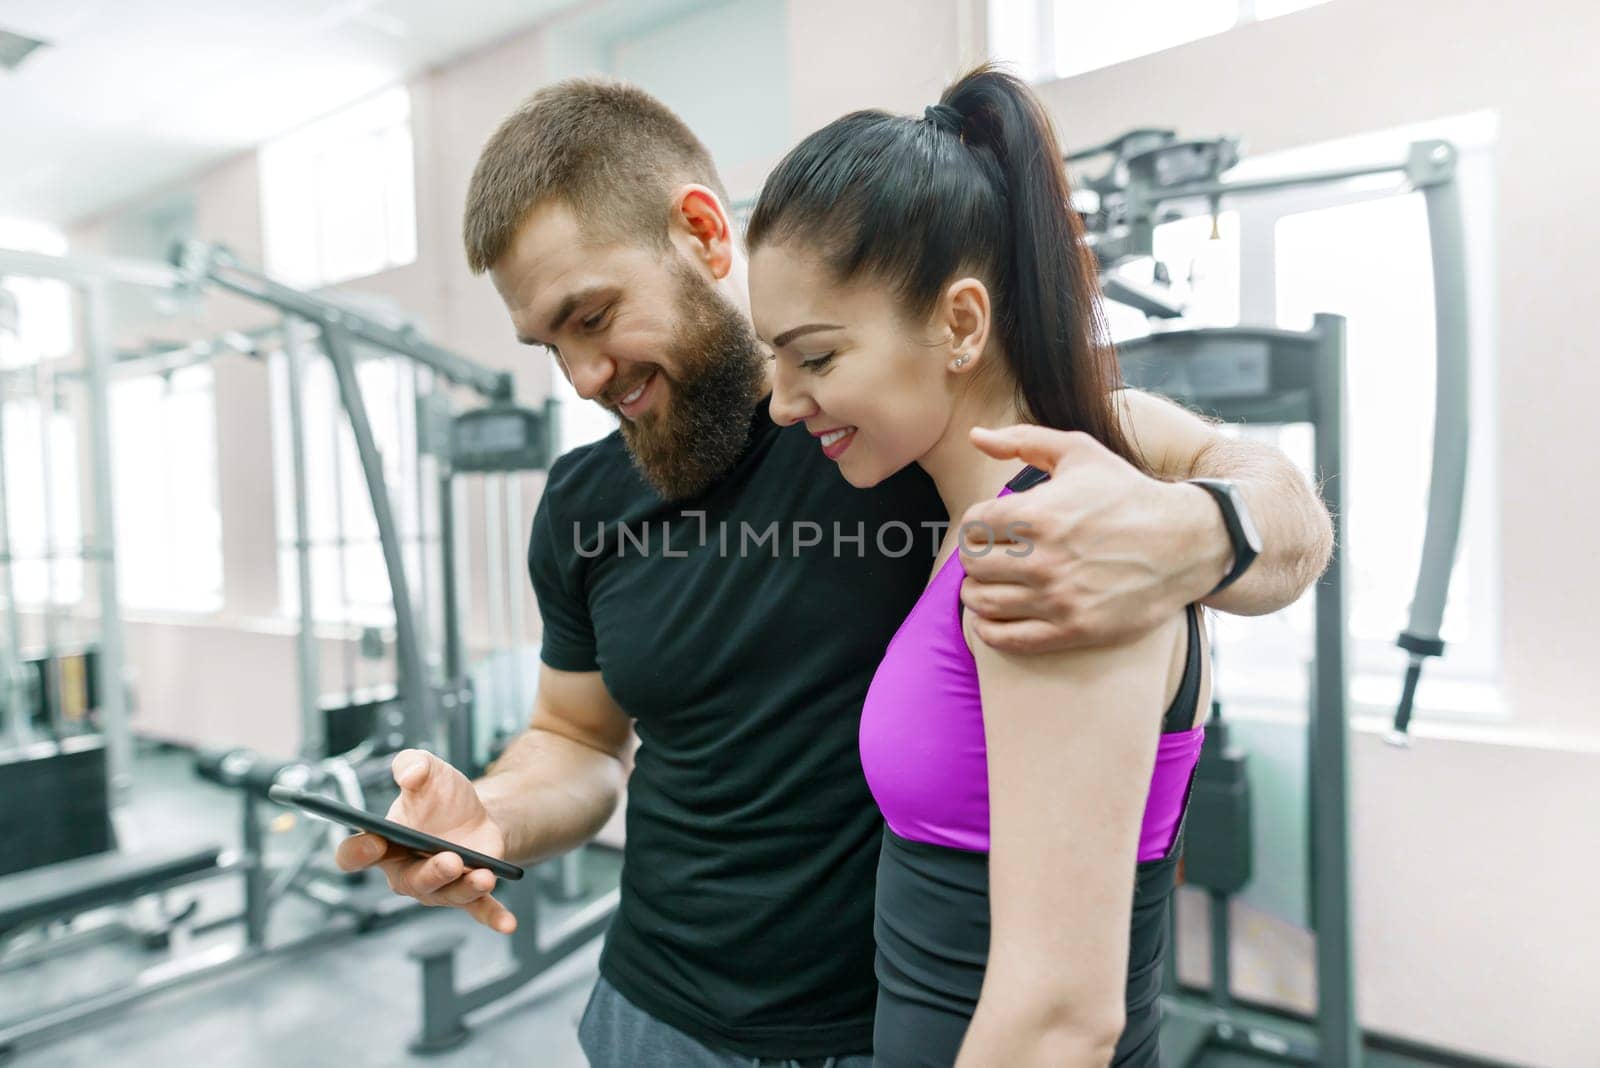 Young woman talking with personal trainer in gym, looking in smartphone and discussing. Fitness, sport, training, people, healthy lifestyle concept.